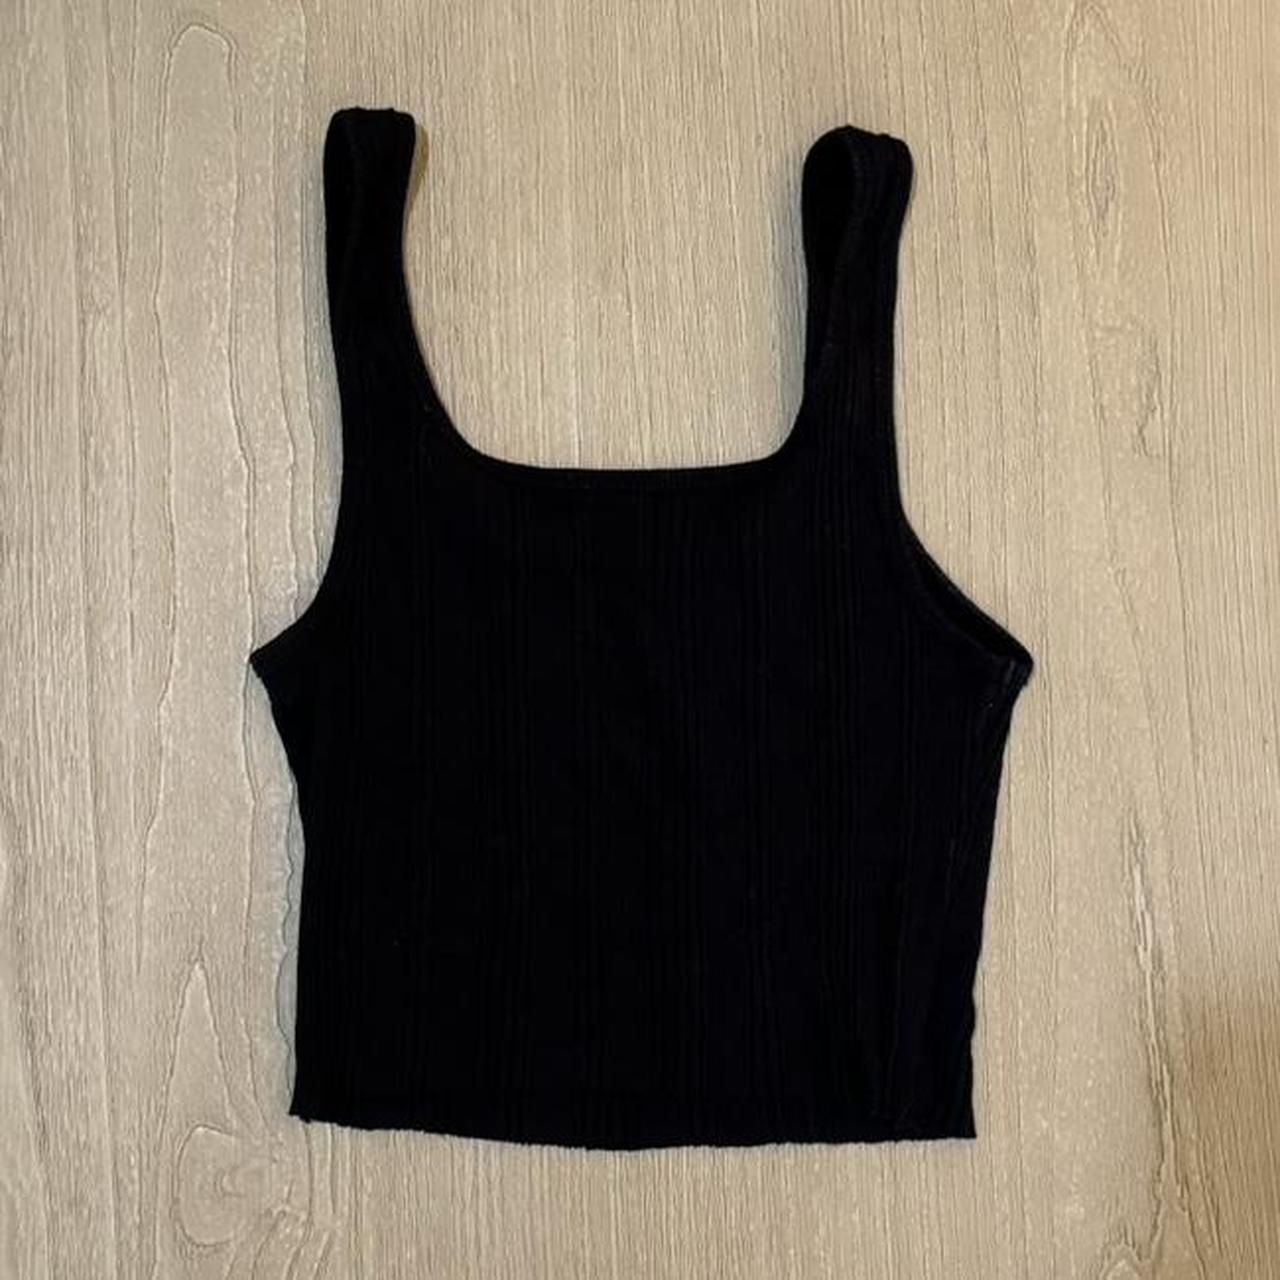 Urban Outfitters Women's Black Crop-top (5)